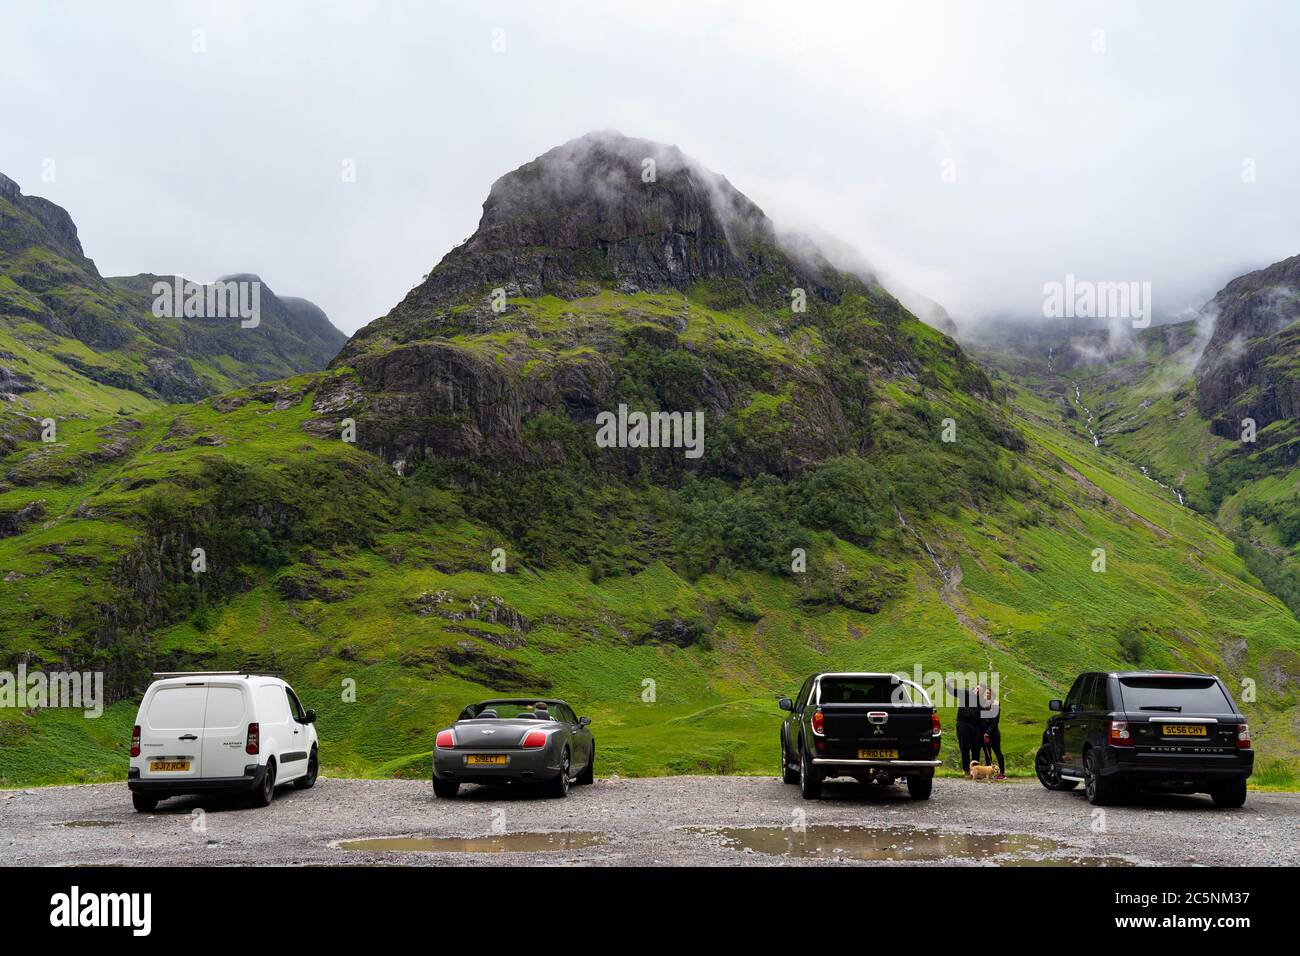 Glen Coe, Scotland, UK. 4 July, 2020. Tourists travel to Glen Coe on first weekend after 5 mile travel restriction was lifted by the Scottish Government. Pictured; Many tourist cars parked at Glen Coe viewpoint . Iain Masterton/Alamy Live News Stock Photo